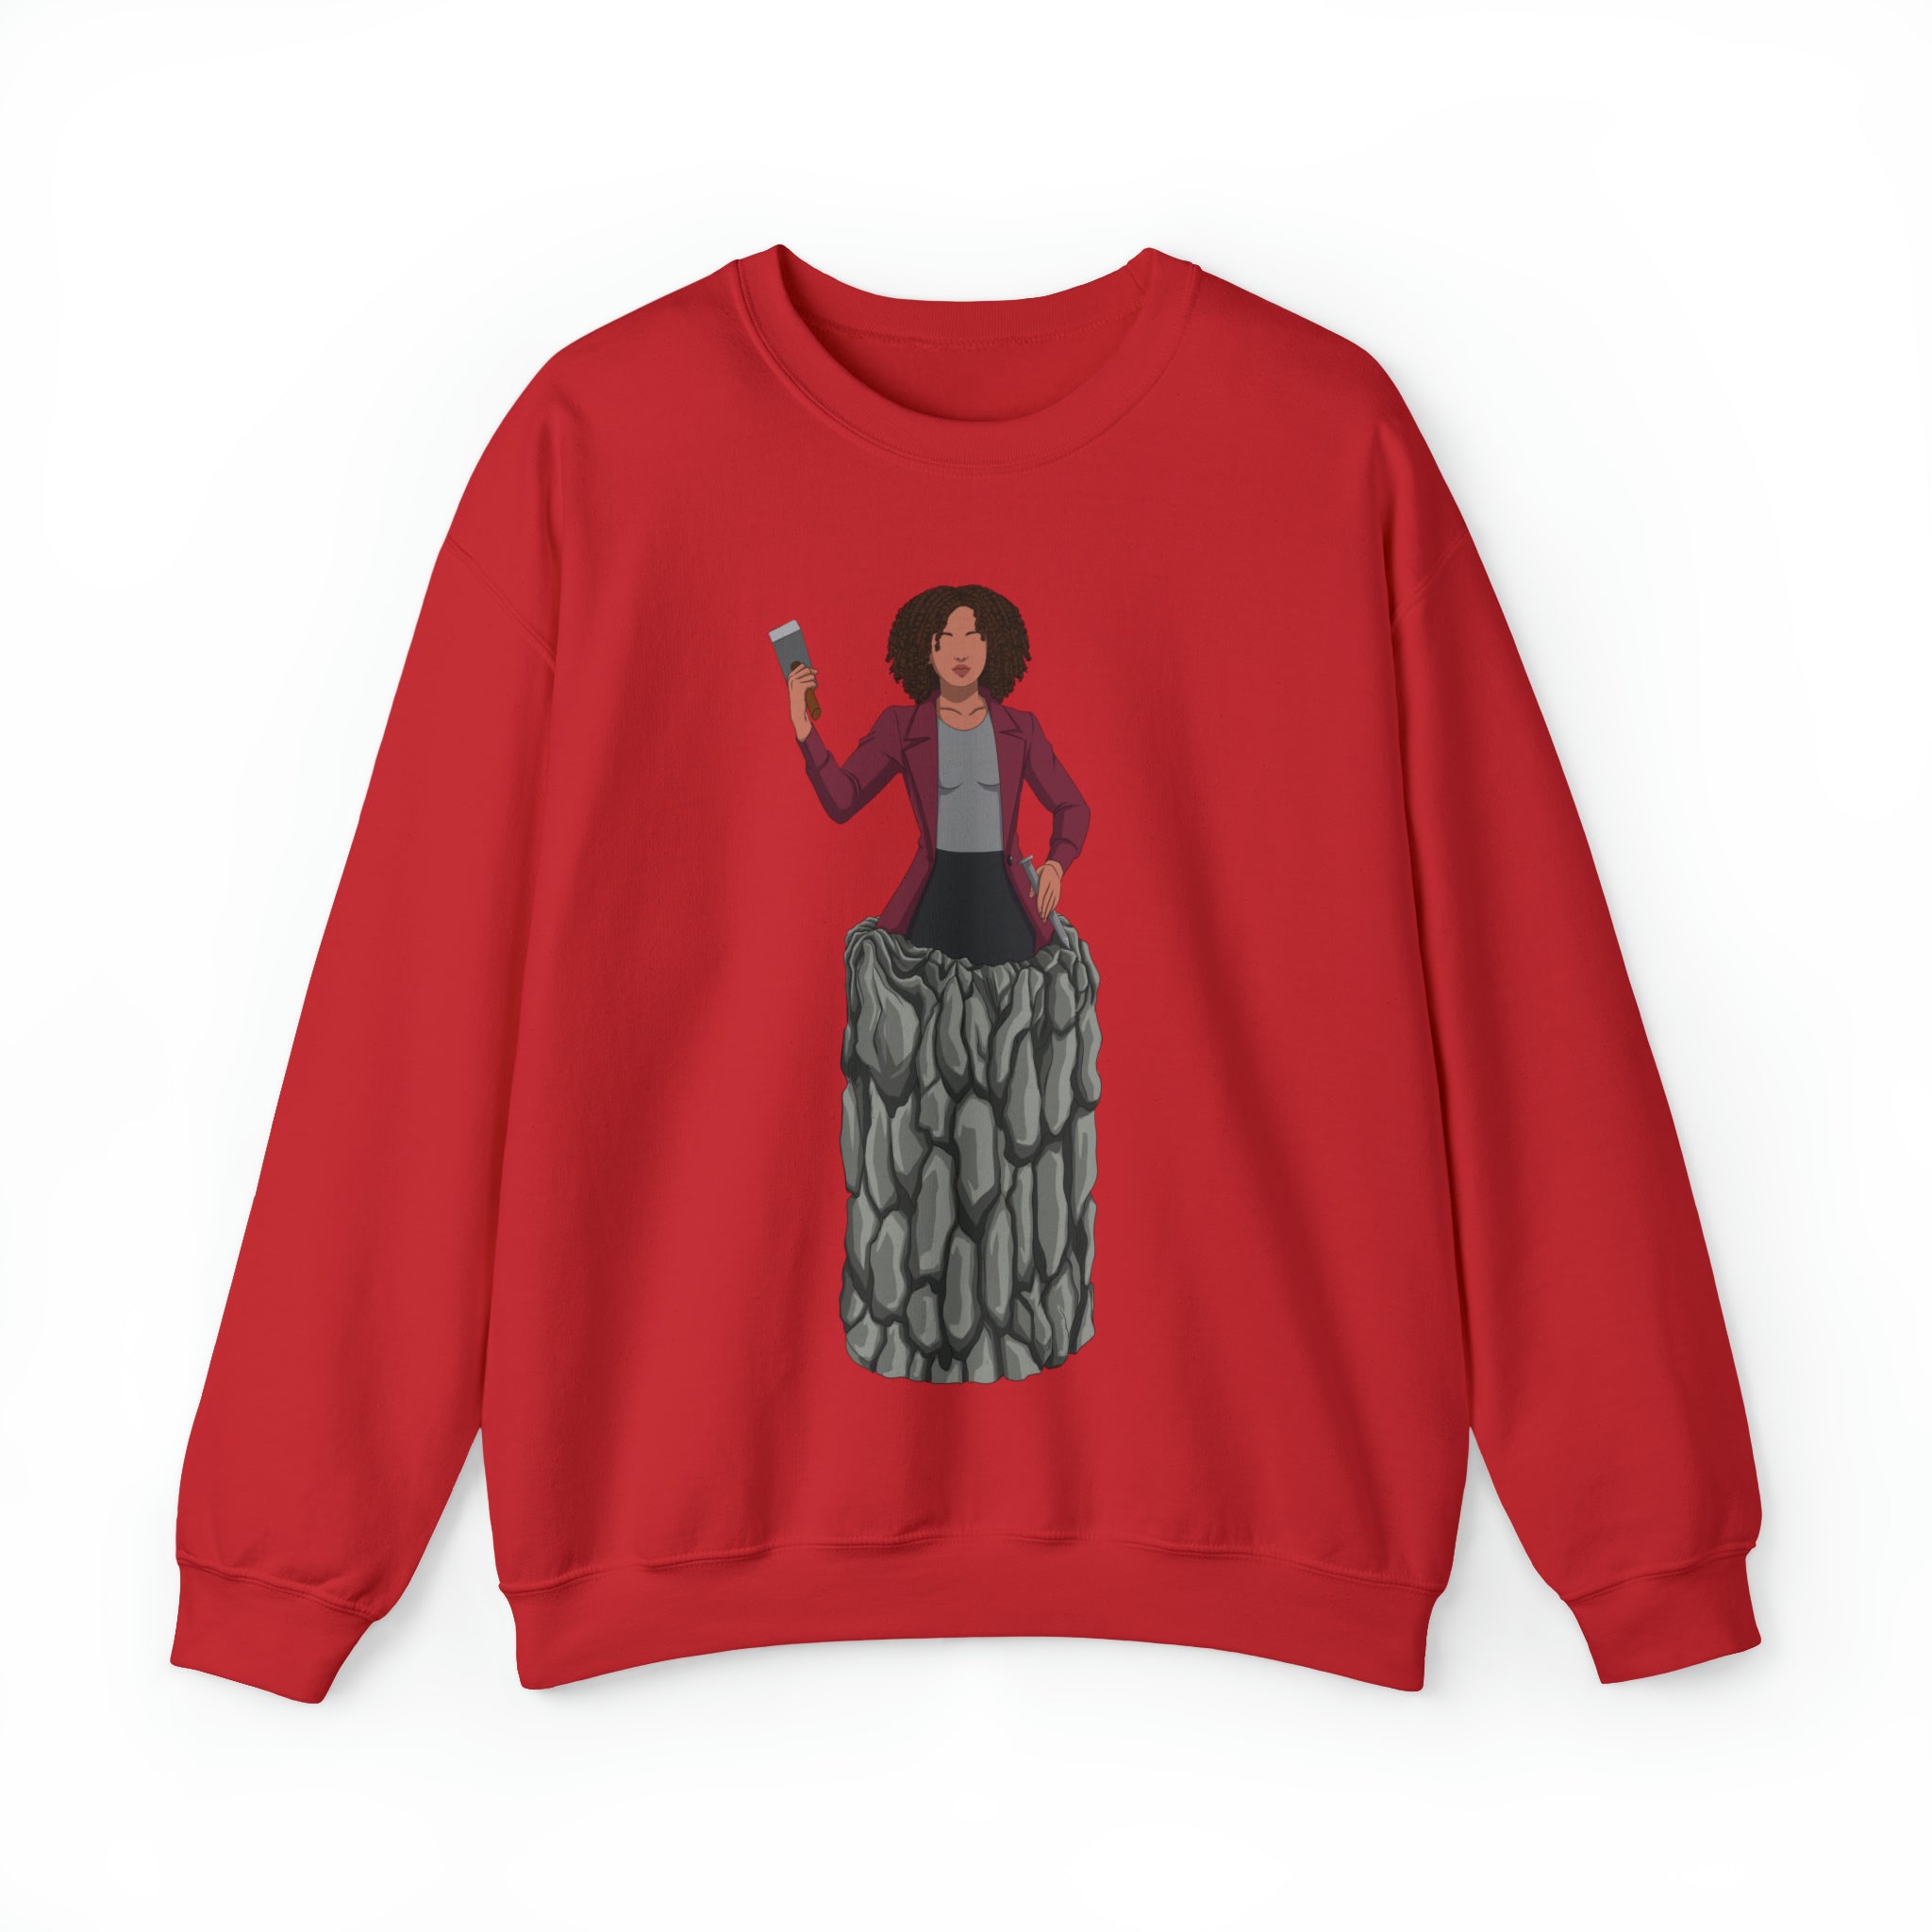 A person working hard to better his/herself - Heavy Blend™ Crewneck Sweatshirt - Woman #15 - Breakthrough Collection